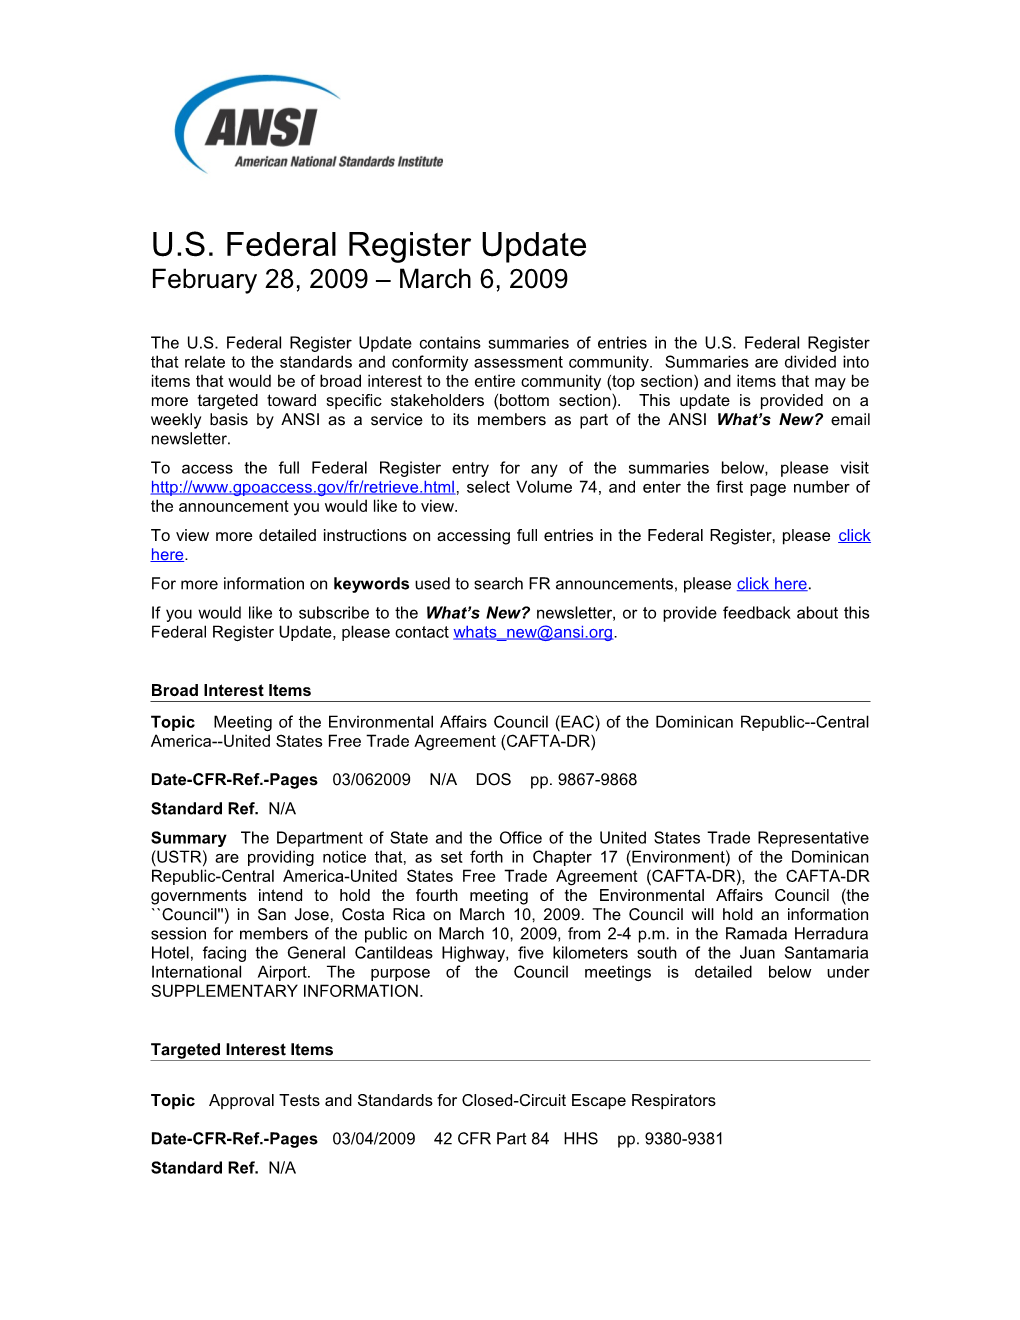 Standards and Trade Related Notices from the U.S. Federal Register, 3.06.09